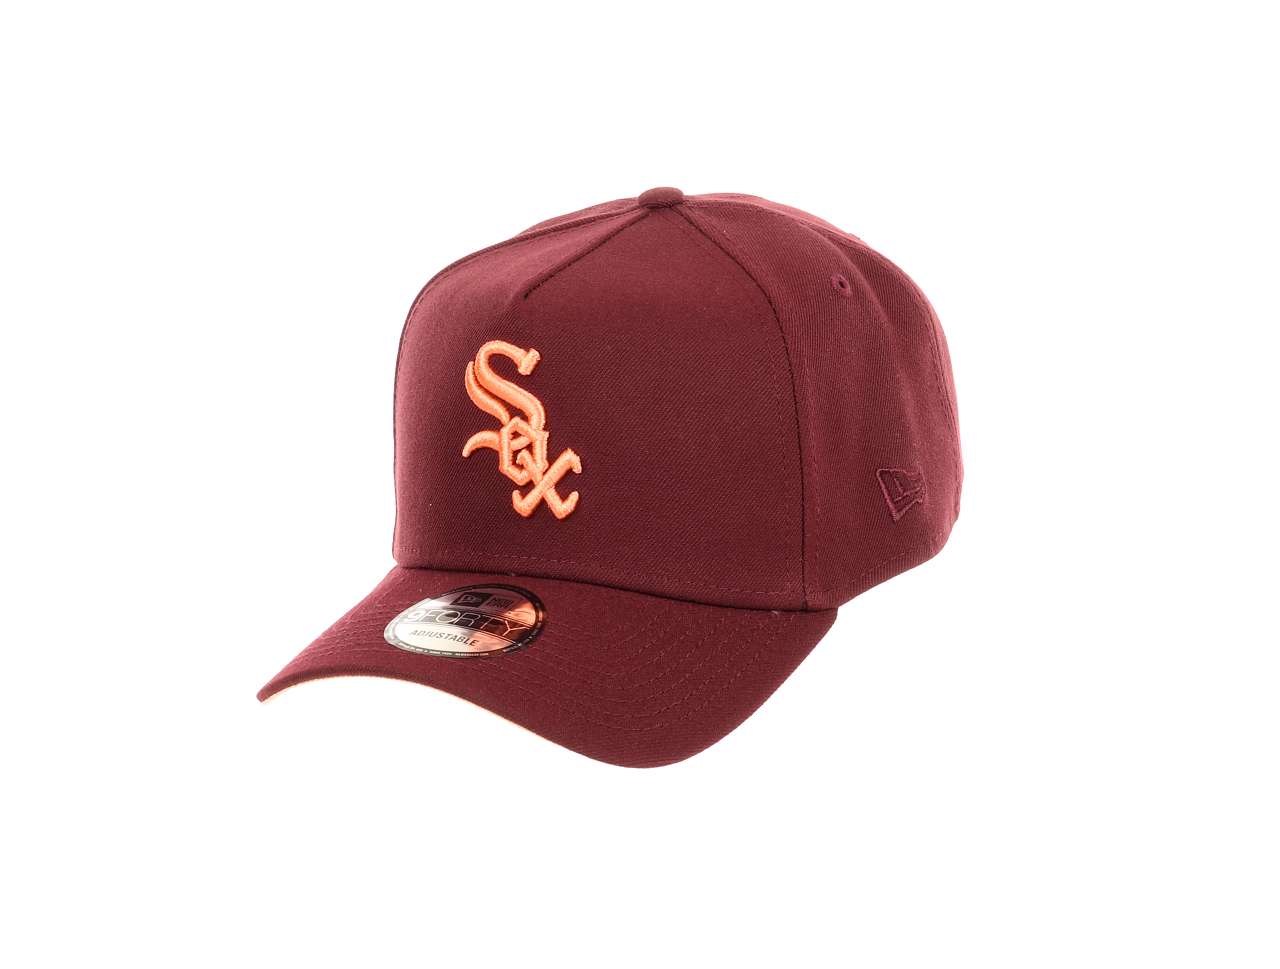  Chicago White Sox MLB All-Star Game 2003  Sidepatch Maroon 9Forty A-Frame Snapback Cap New Era